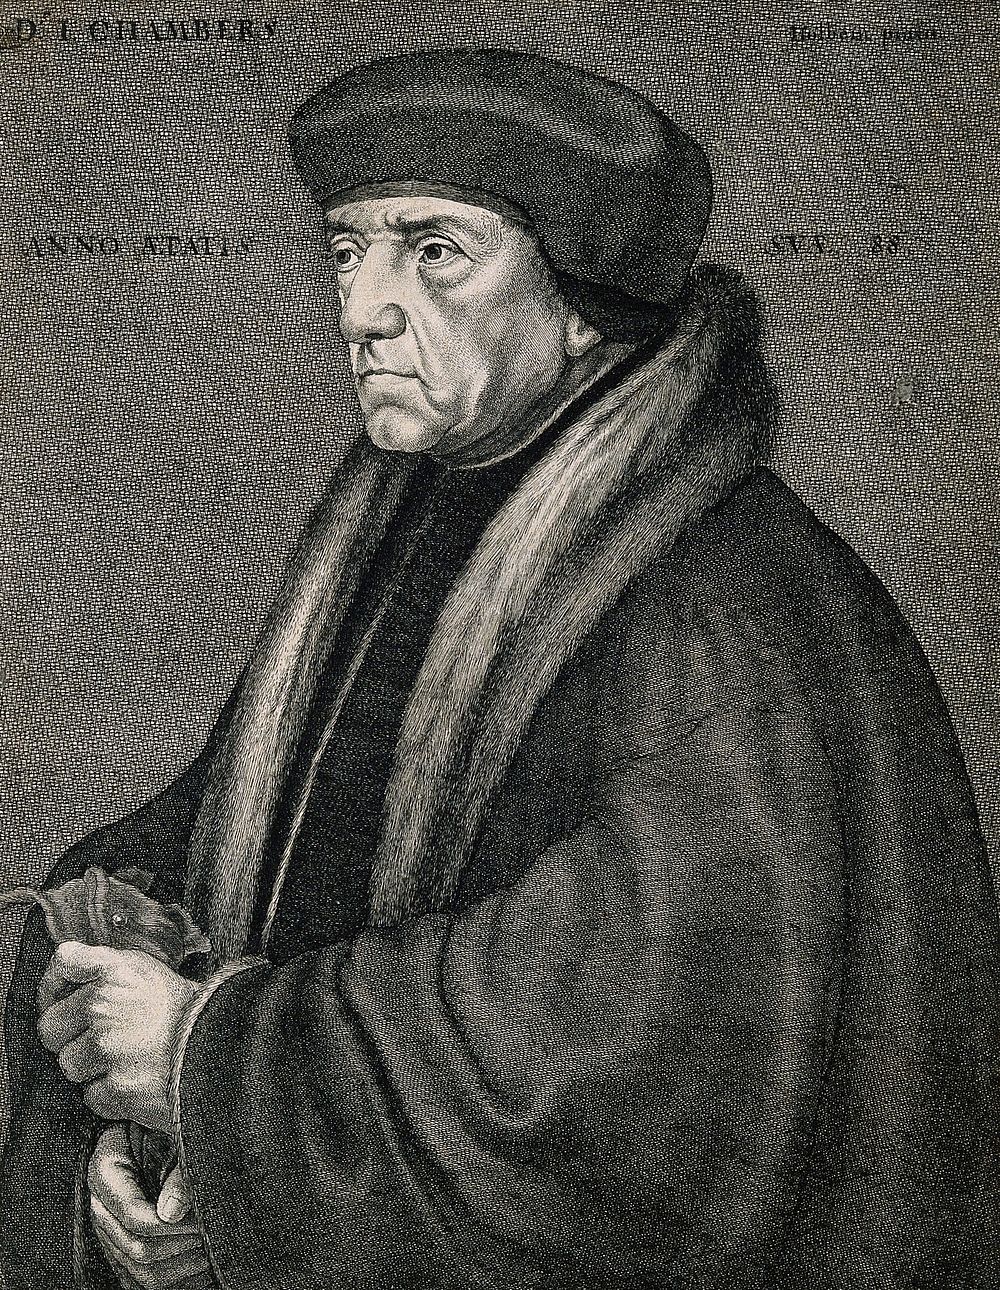 Sir John Chambers [Chambre]. Etching by W. Hollar, 1648, after H. Holbein, 1543.